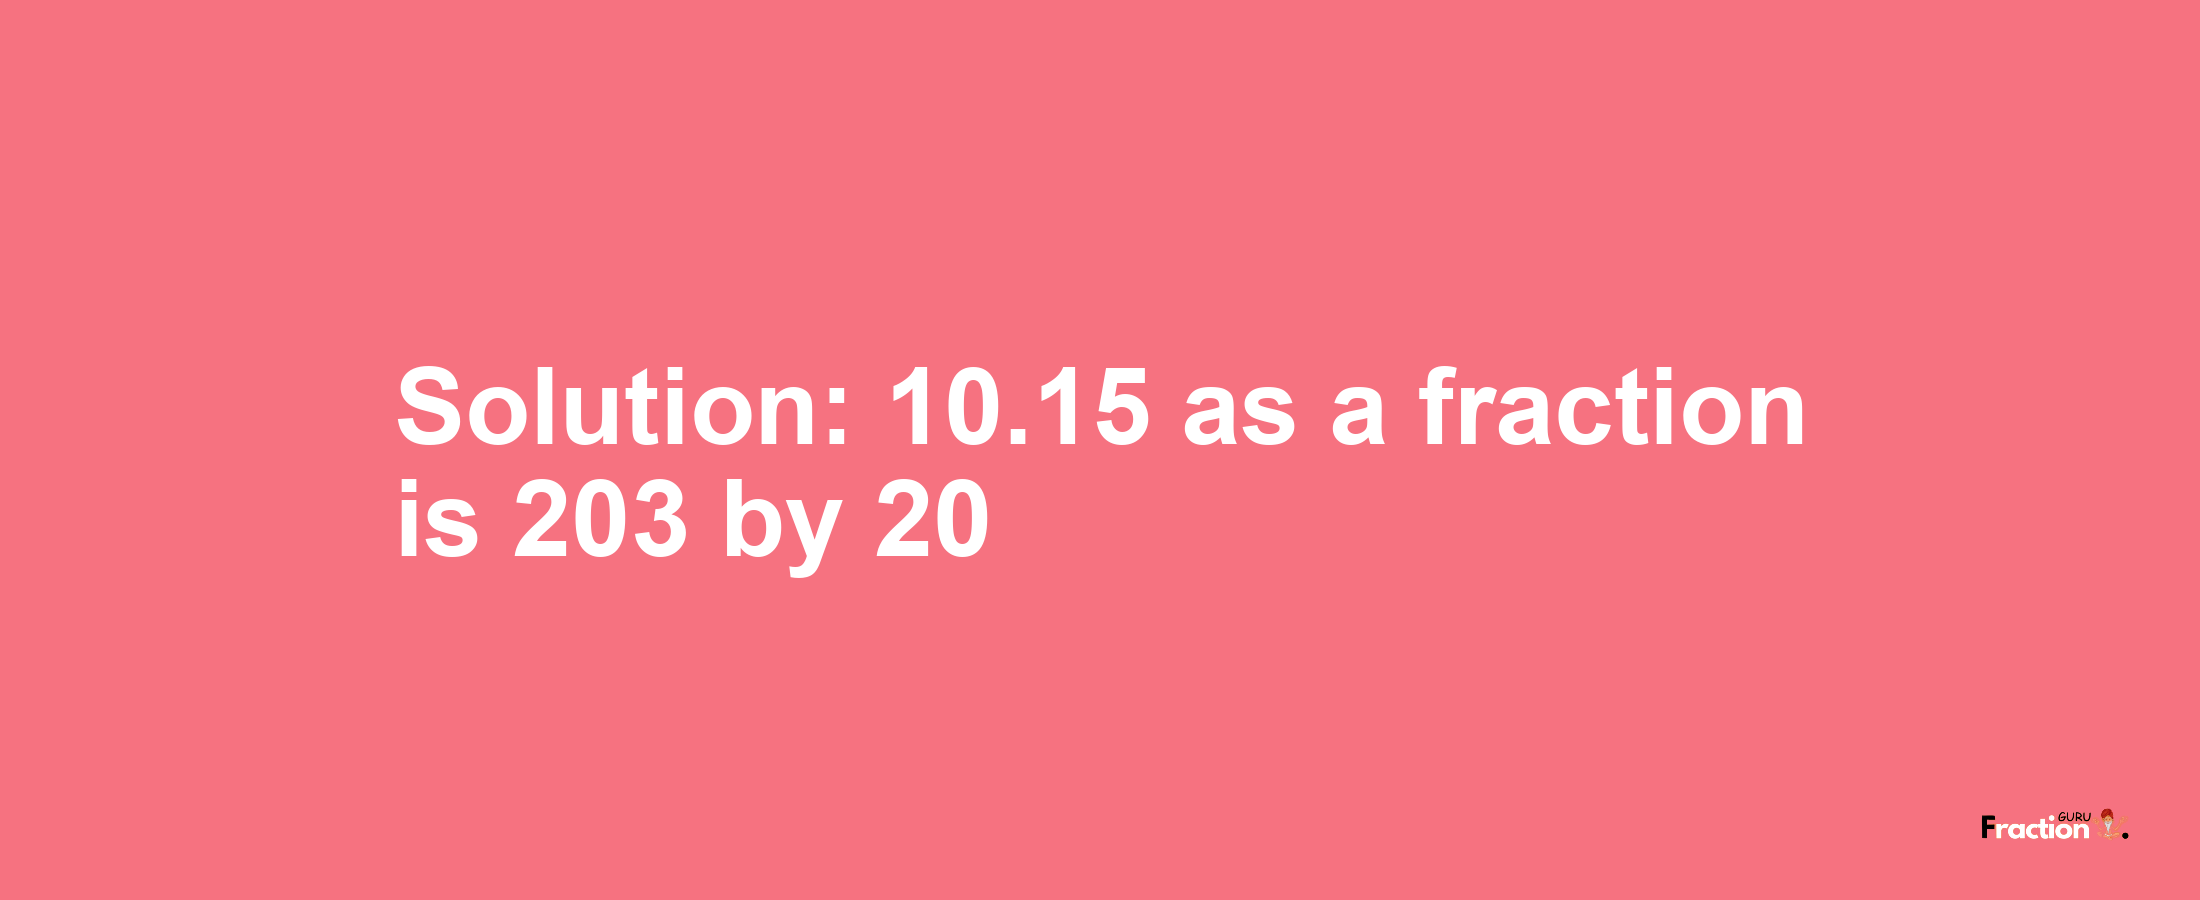 Solution:10.15 as a fraction is 203/20